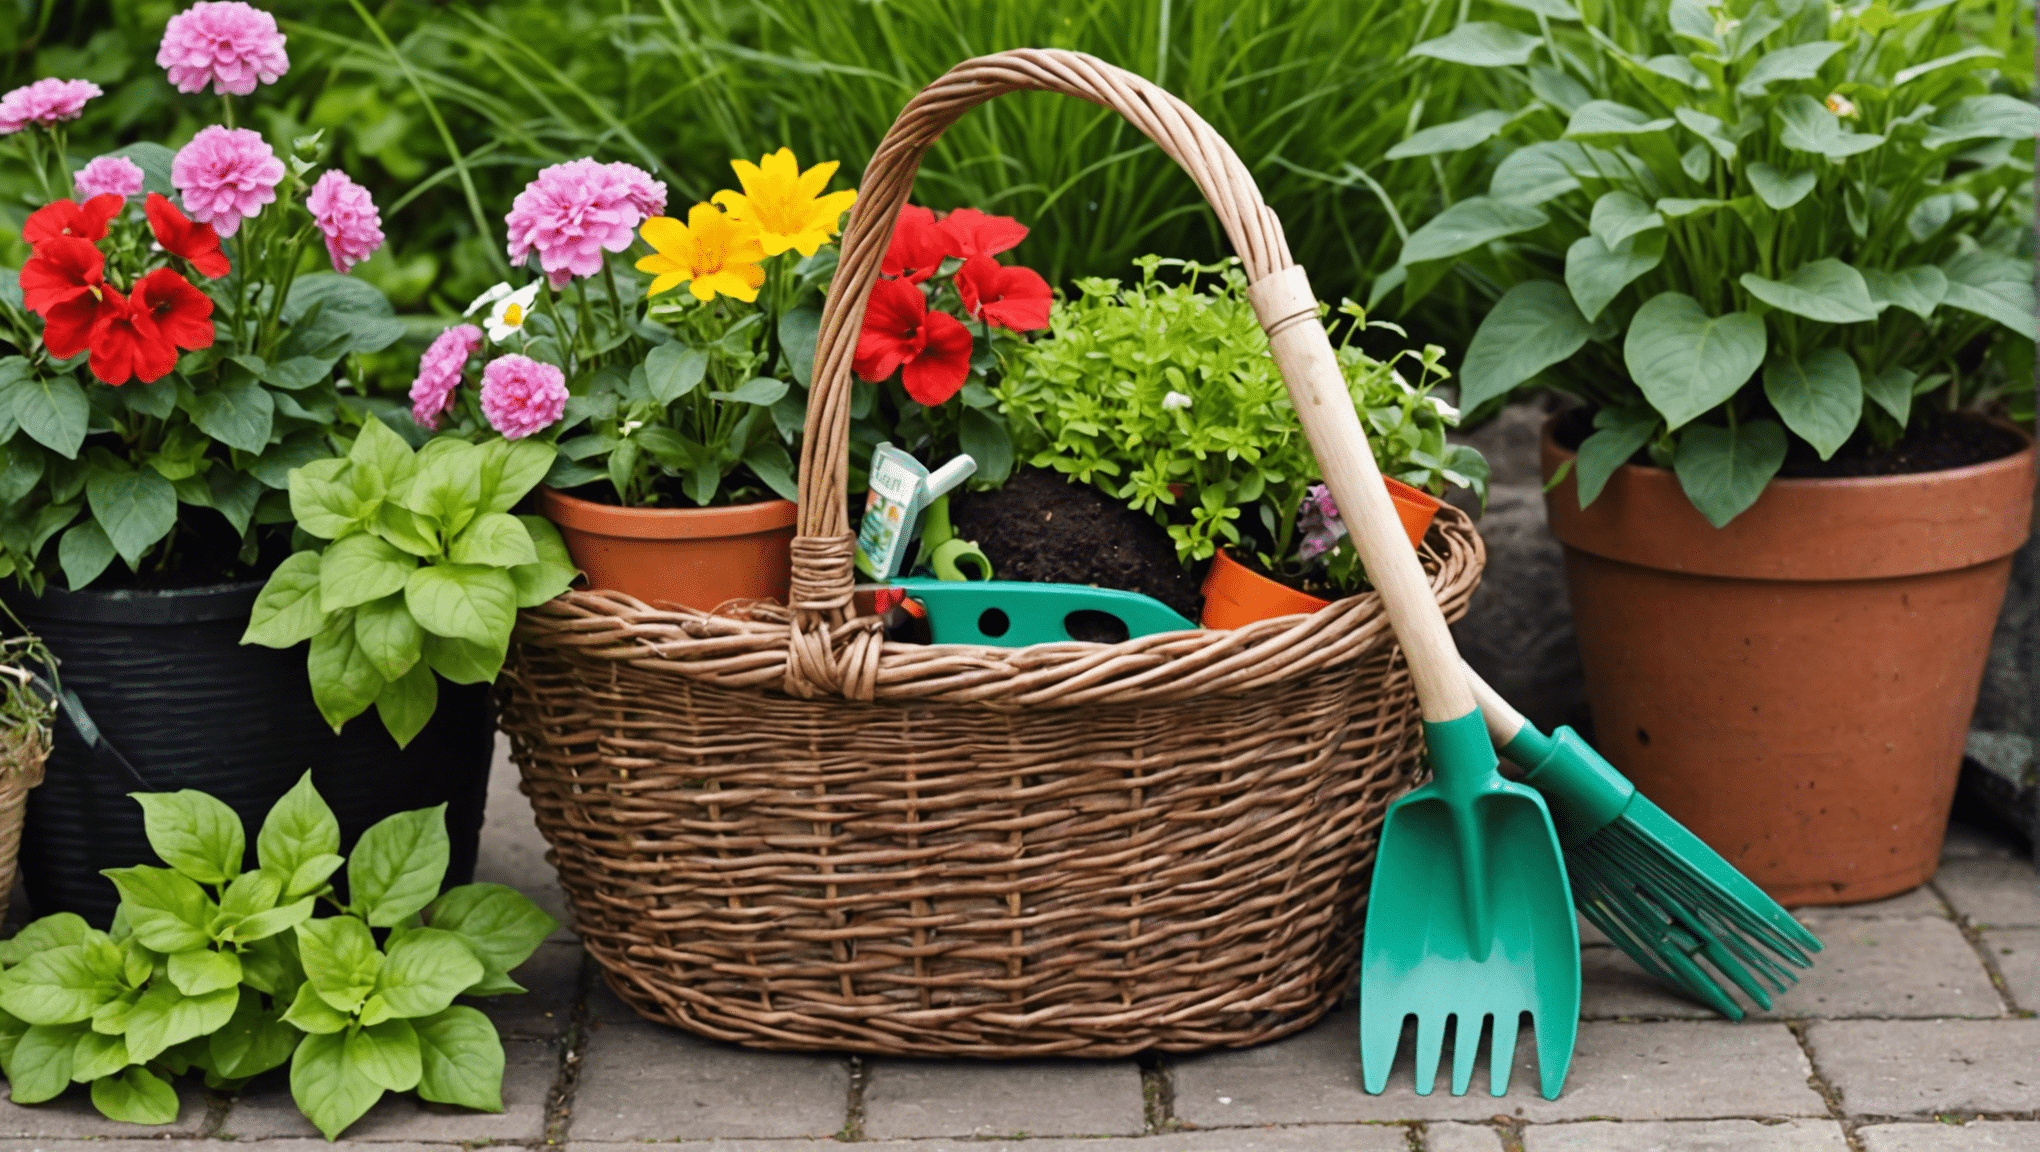 discover the must-have items for a gardening basket and transform your gardening experience with essential tools, accessories, and equipment.